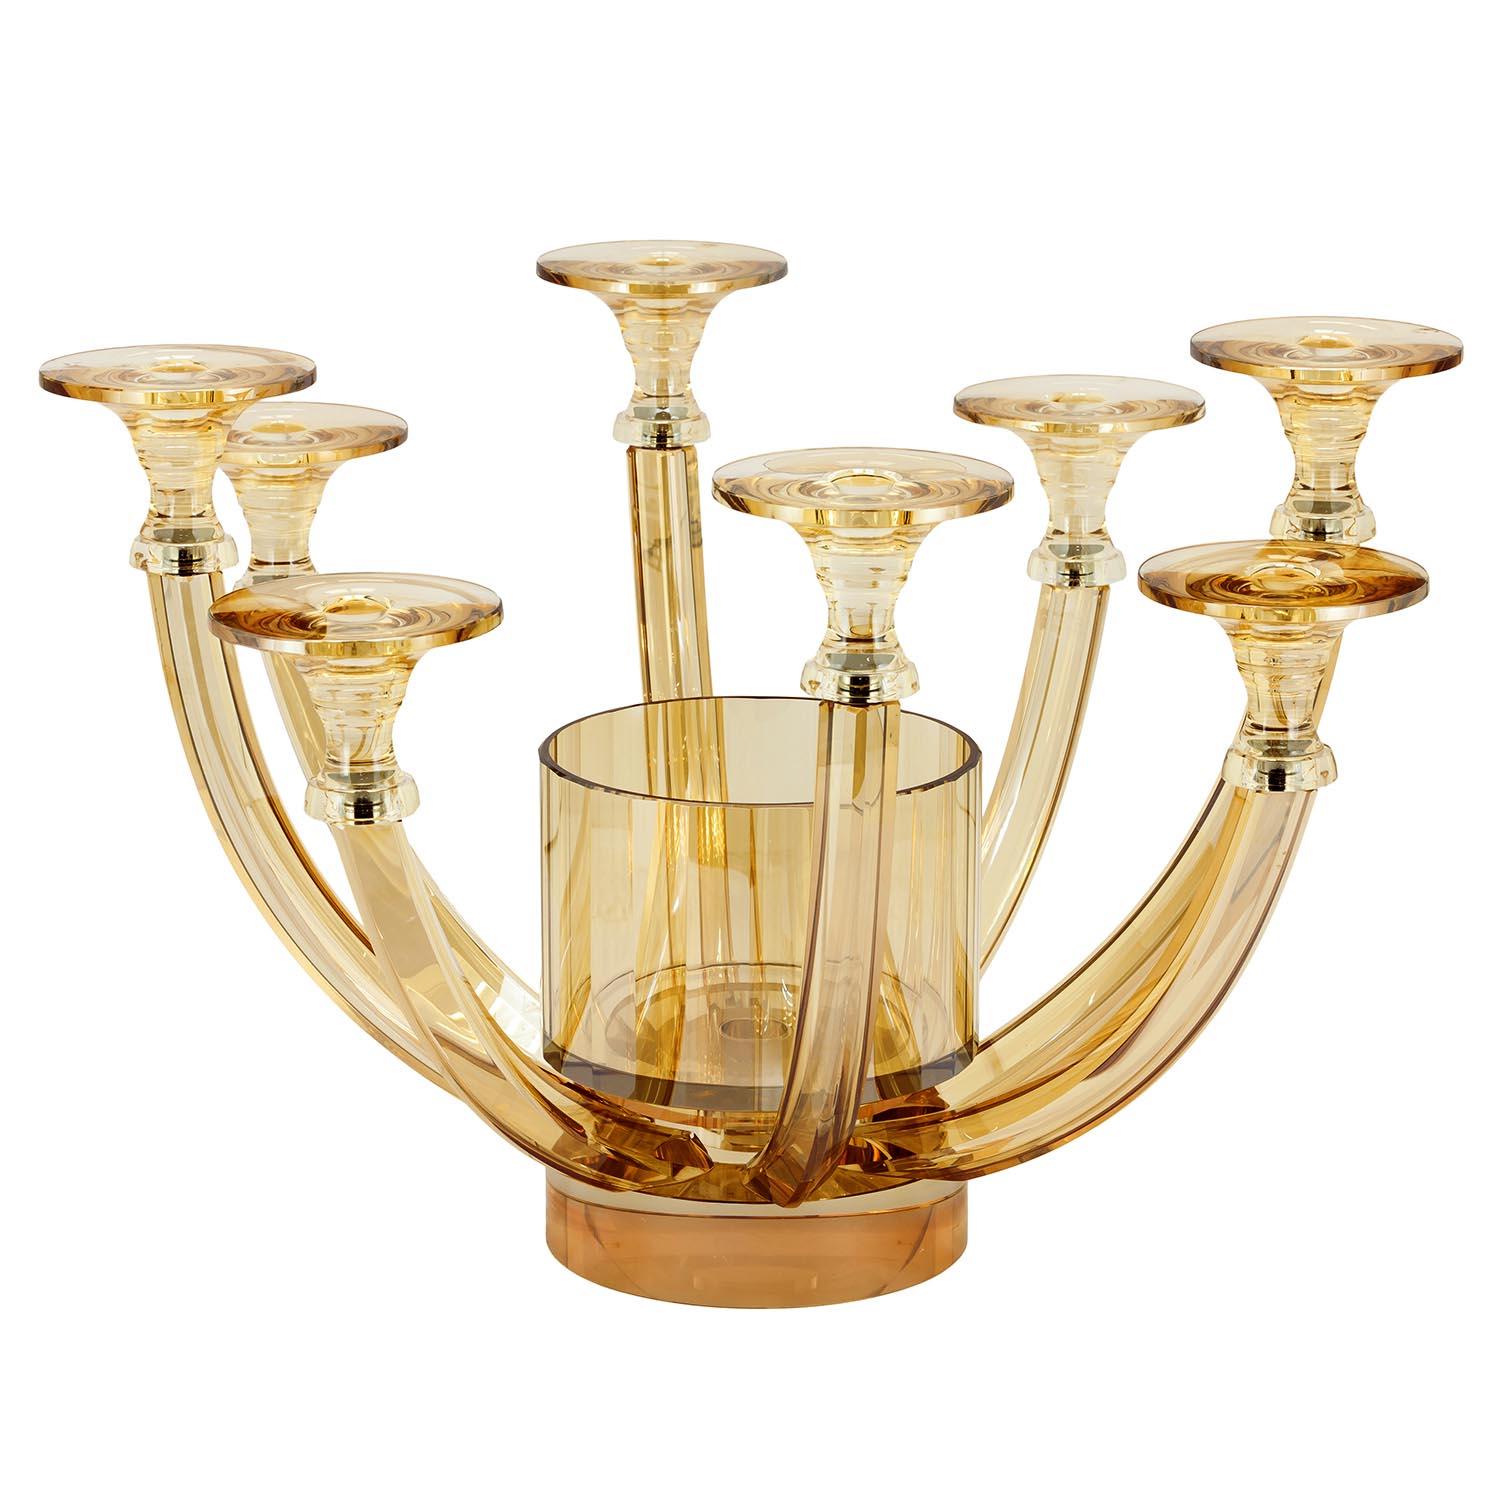 Stylish crystal vase-candlestick in amber color

Candlestick with a vase in the middle, 8 candleholder arms with a vase in the center, candleholder with screw fittings made entirely of crystal glass, champagne/amber color, Made in Italy

Italian